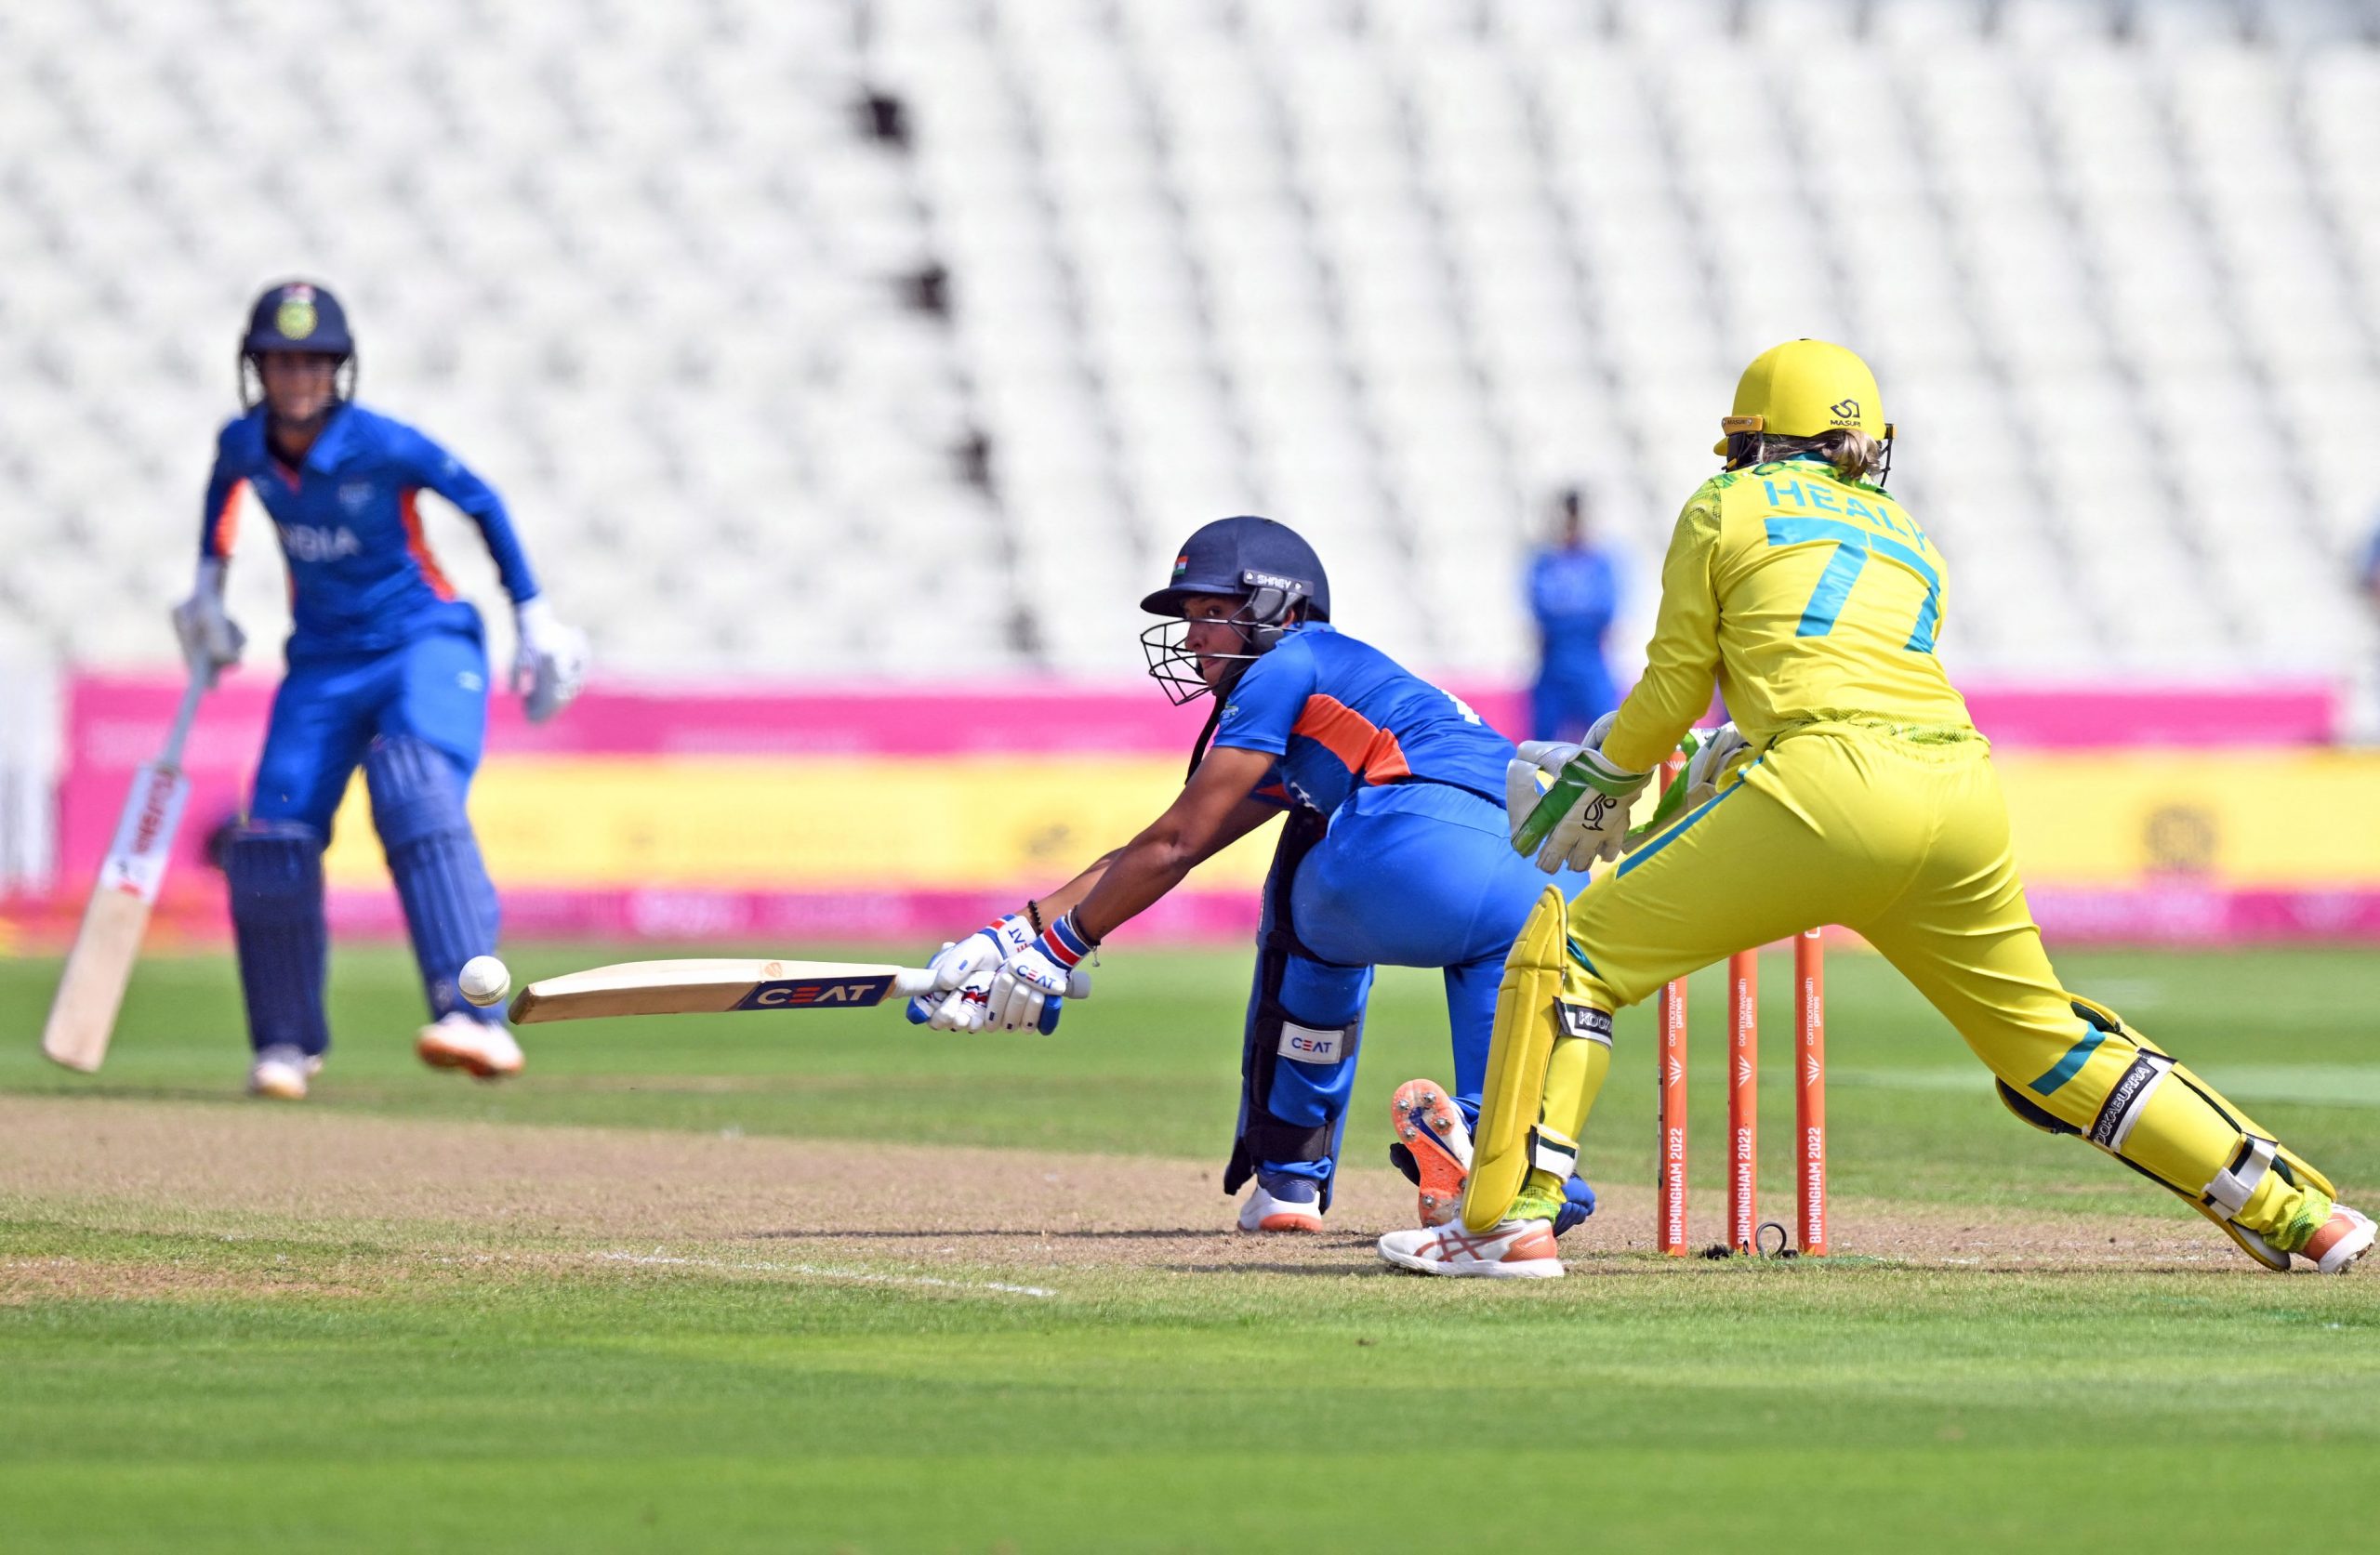 Commonwealth Games 2022: Australia beat India by 3 wickets